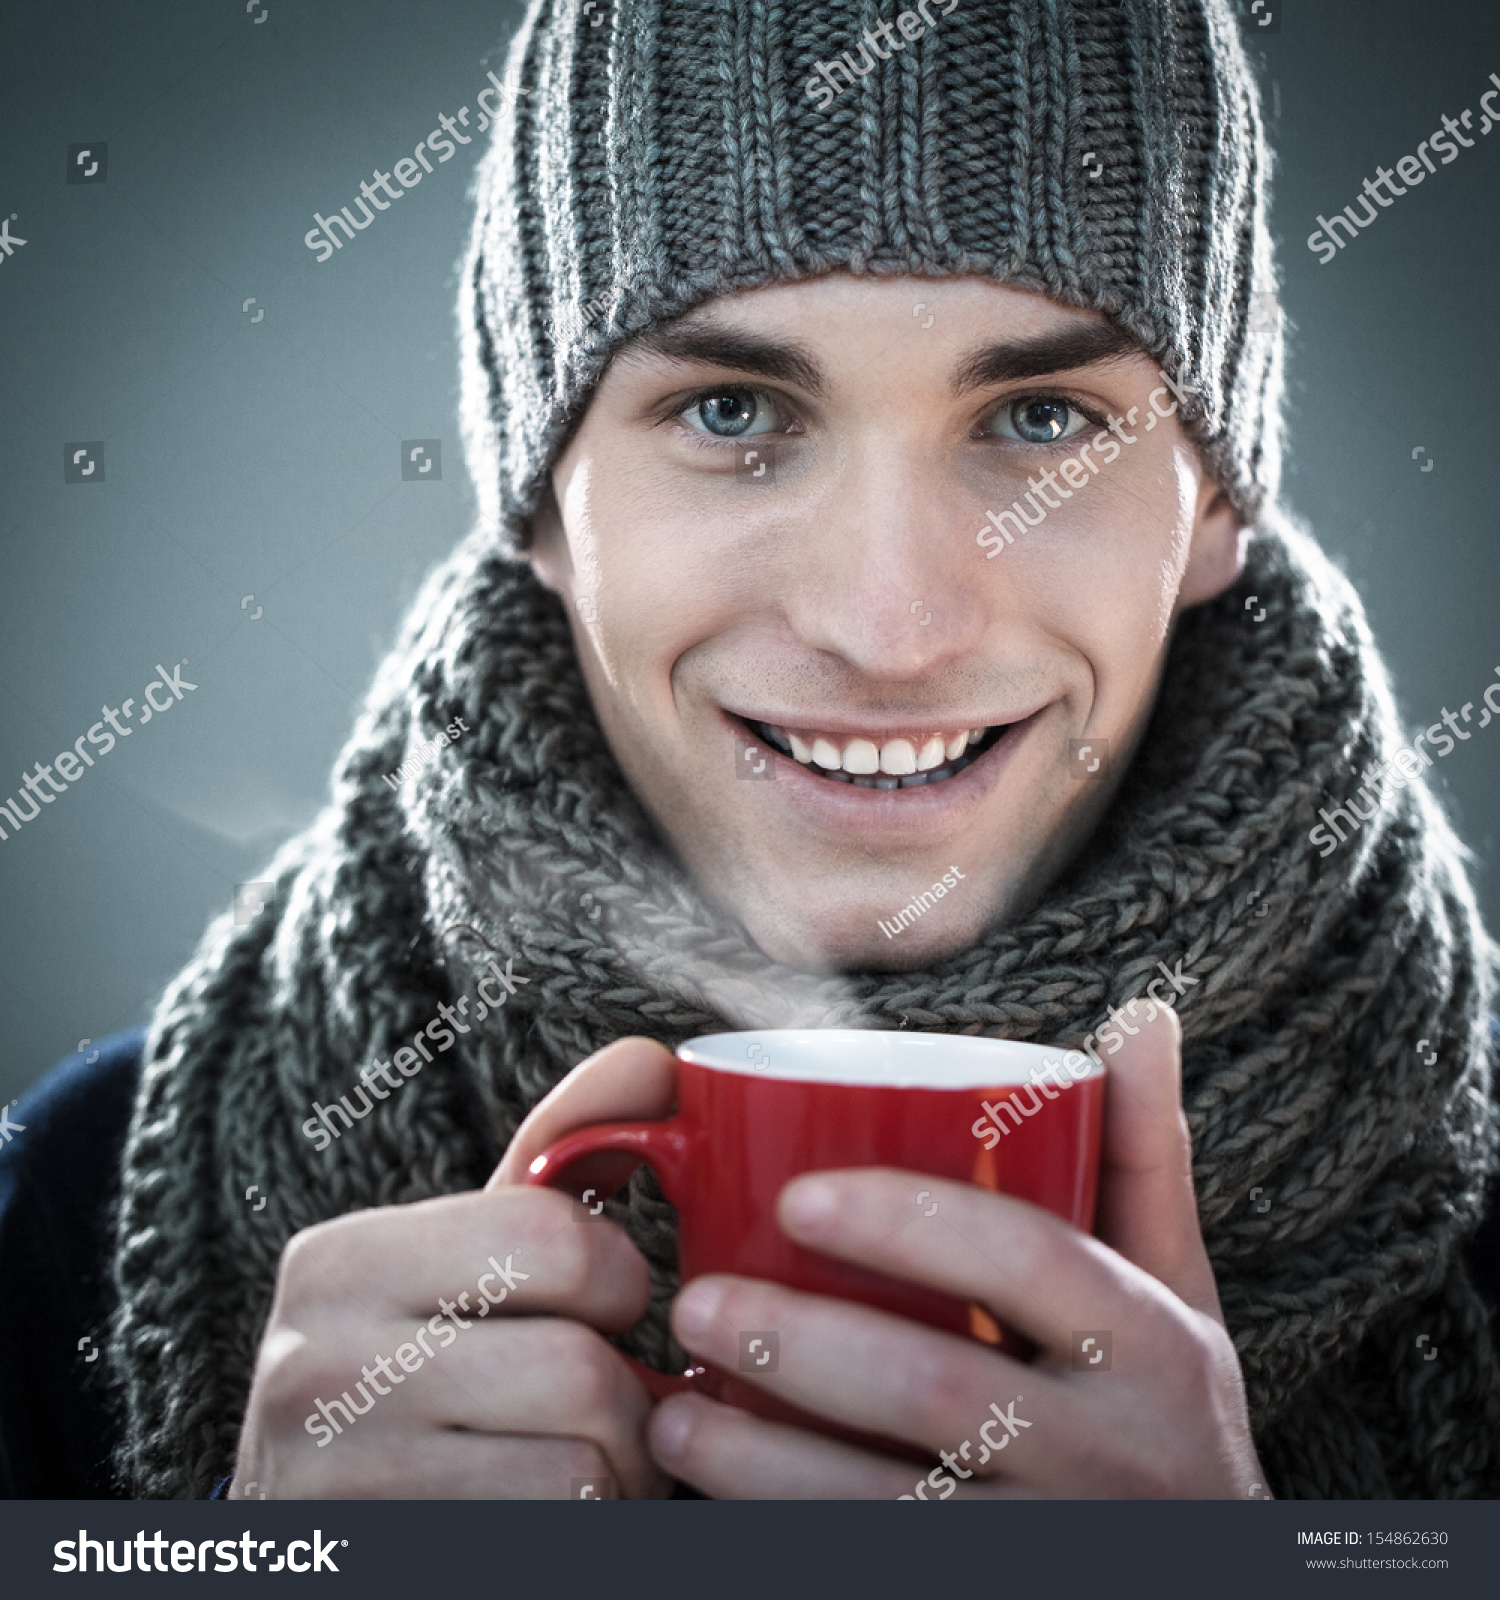 Handsome Young Man In Winter Clothes Holding A Cup Of Hot Tea. Stock ...